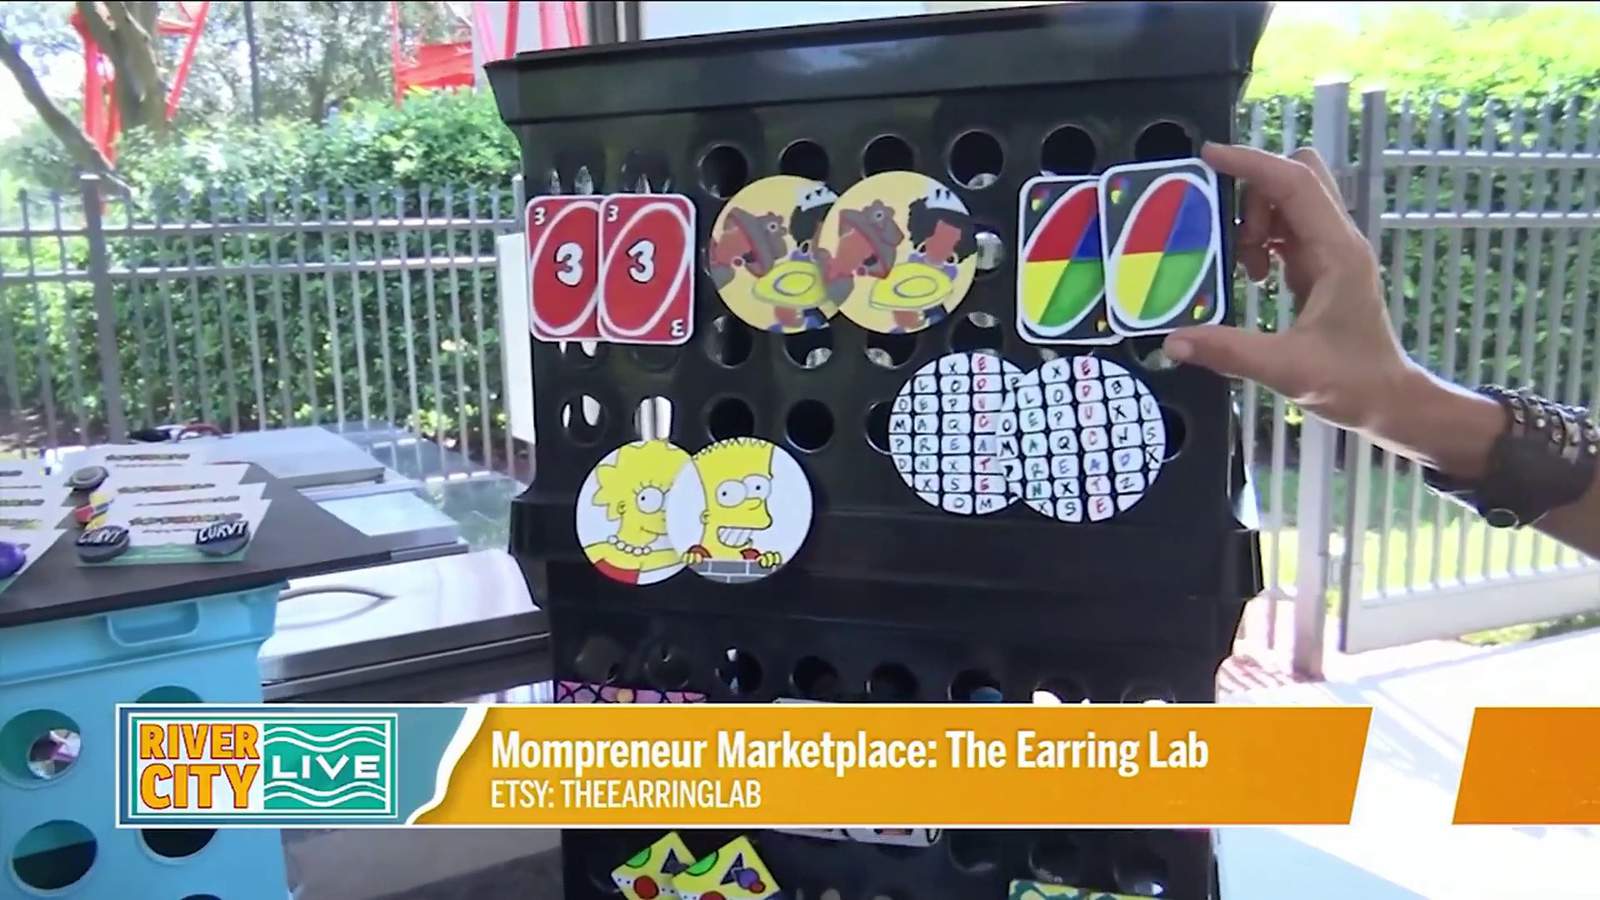 Mompreneur Marketplace: The Earring Lab | River City Live